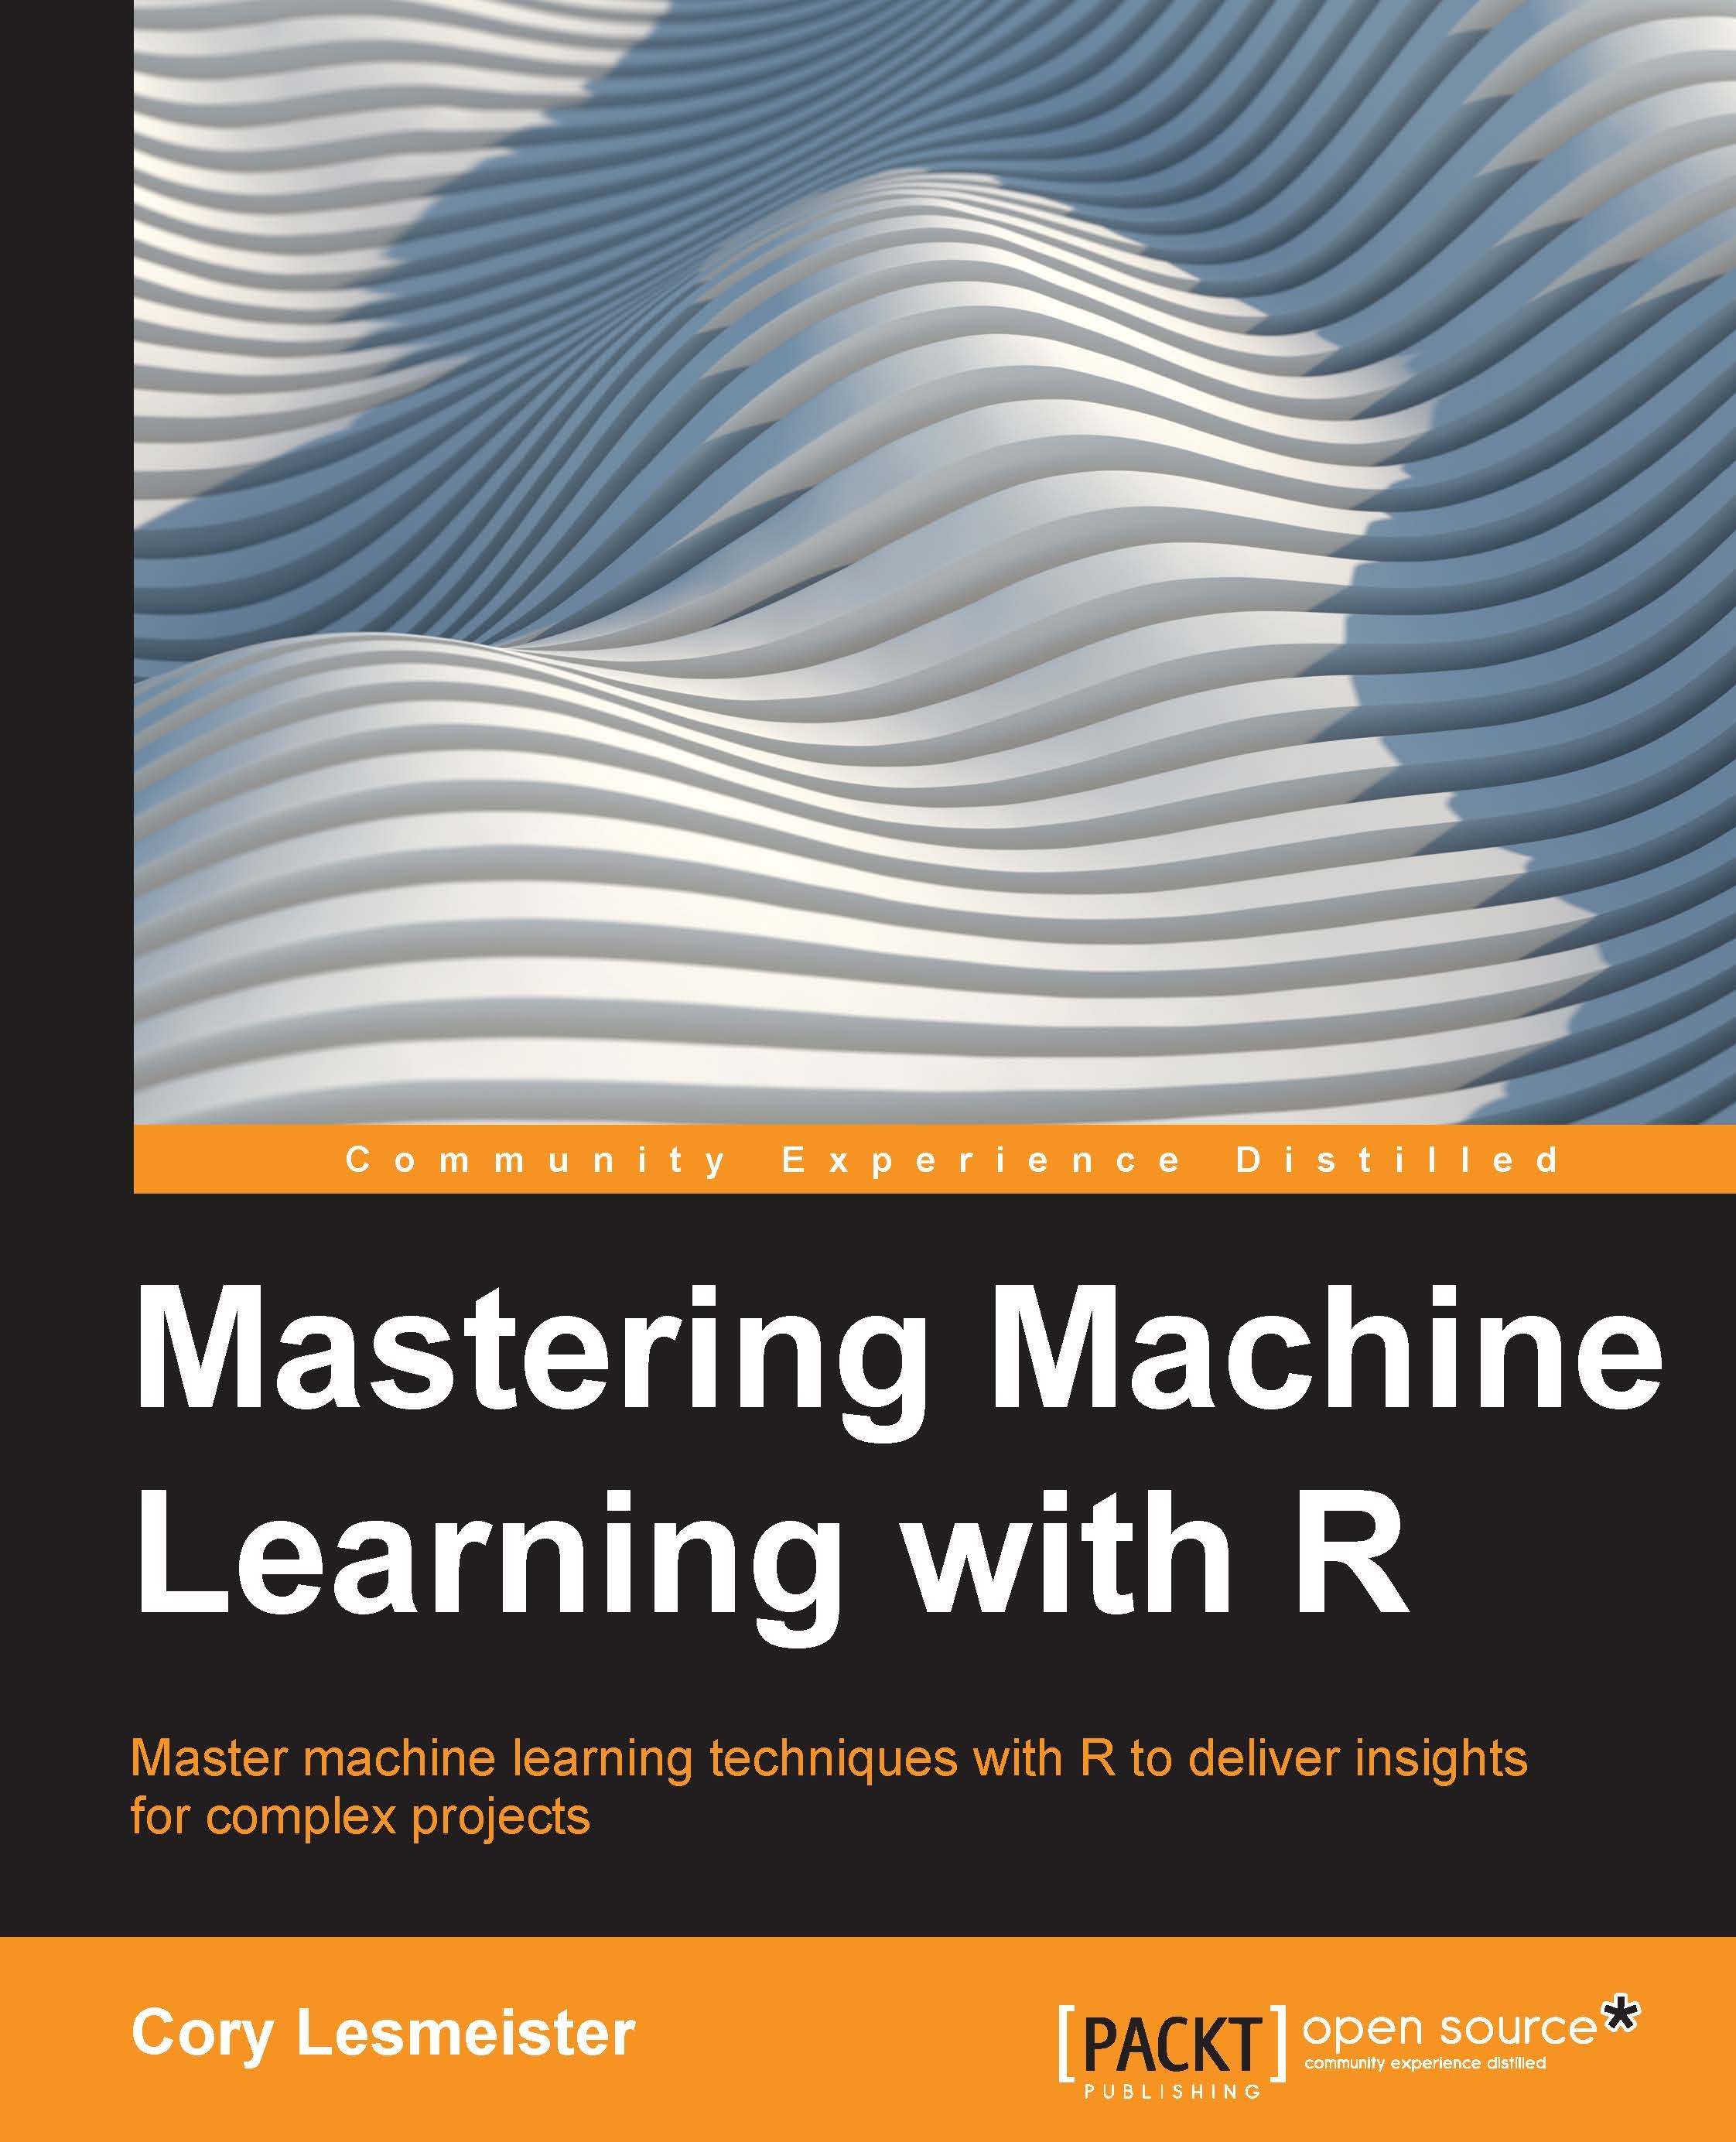 Mastering Machine Learning with R - Cory Lesmeister